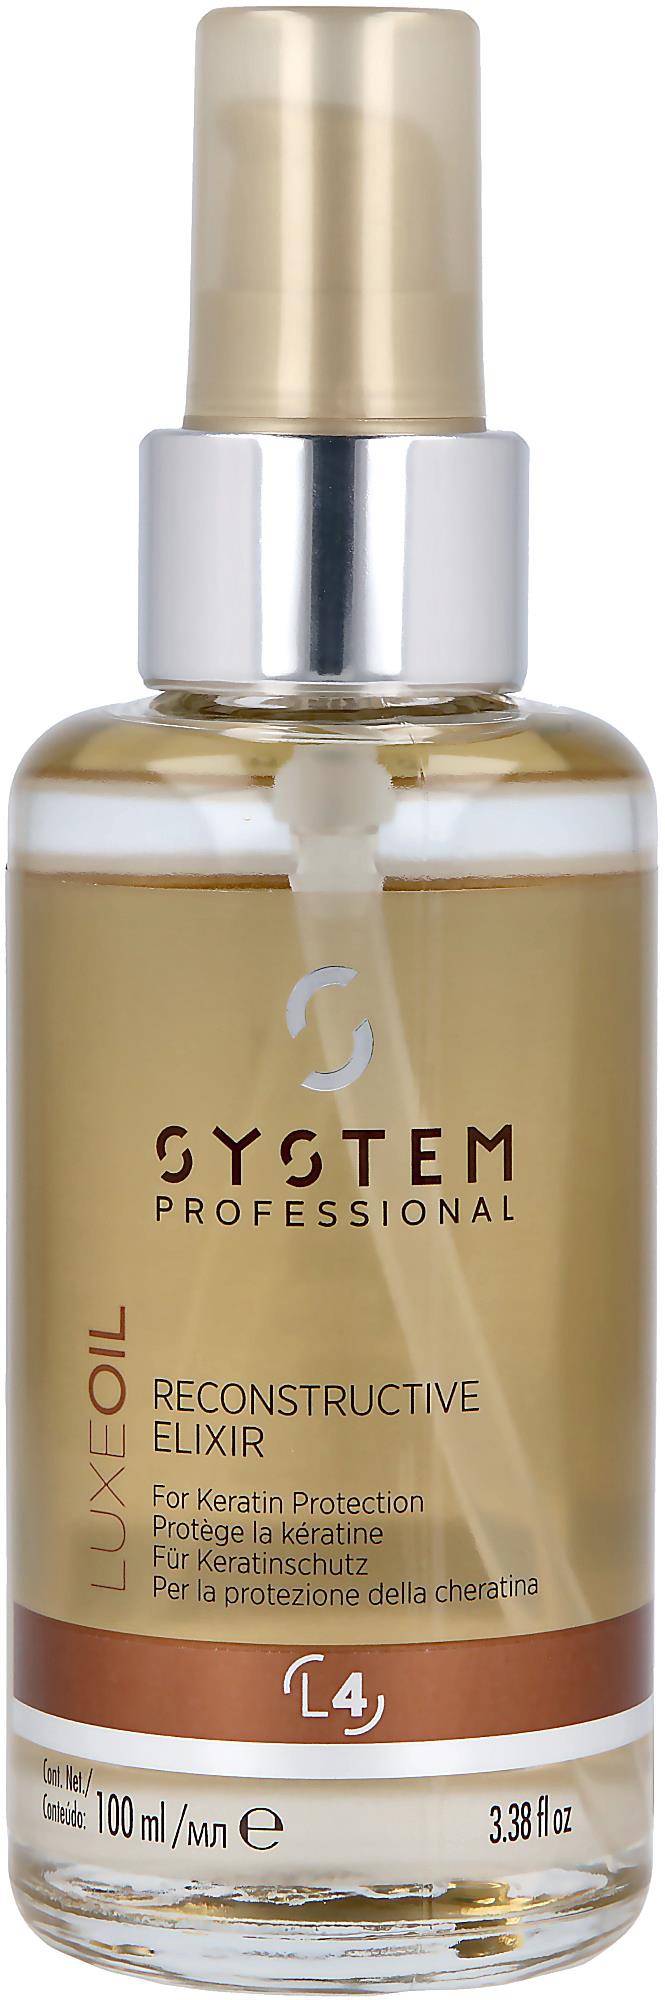 System Professional Luxe Oil